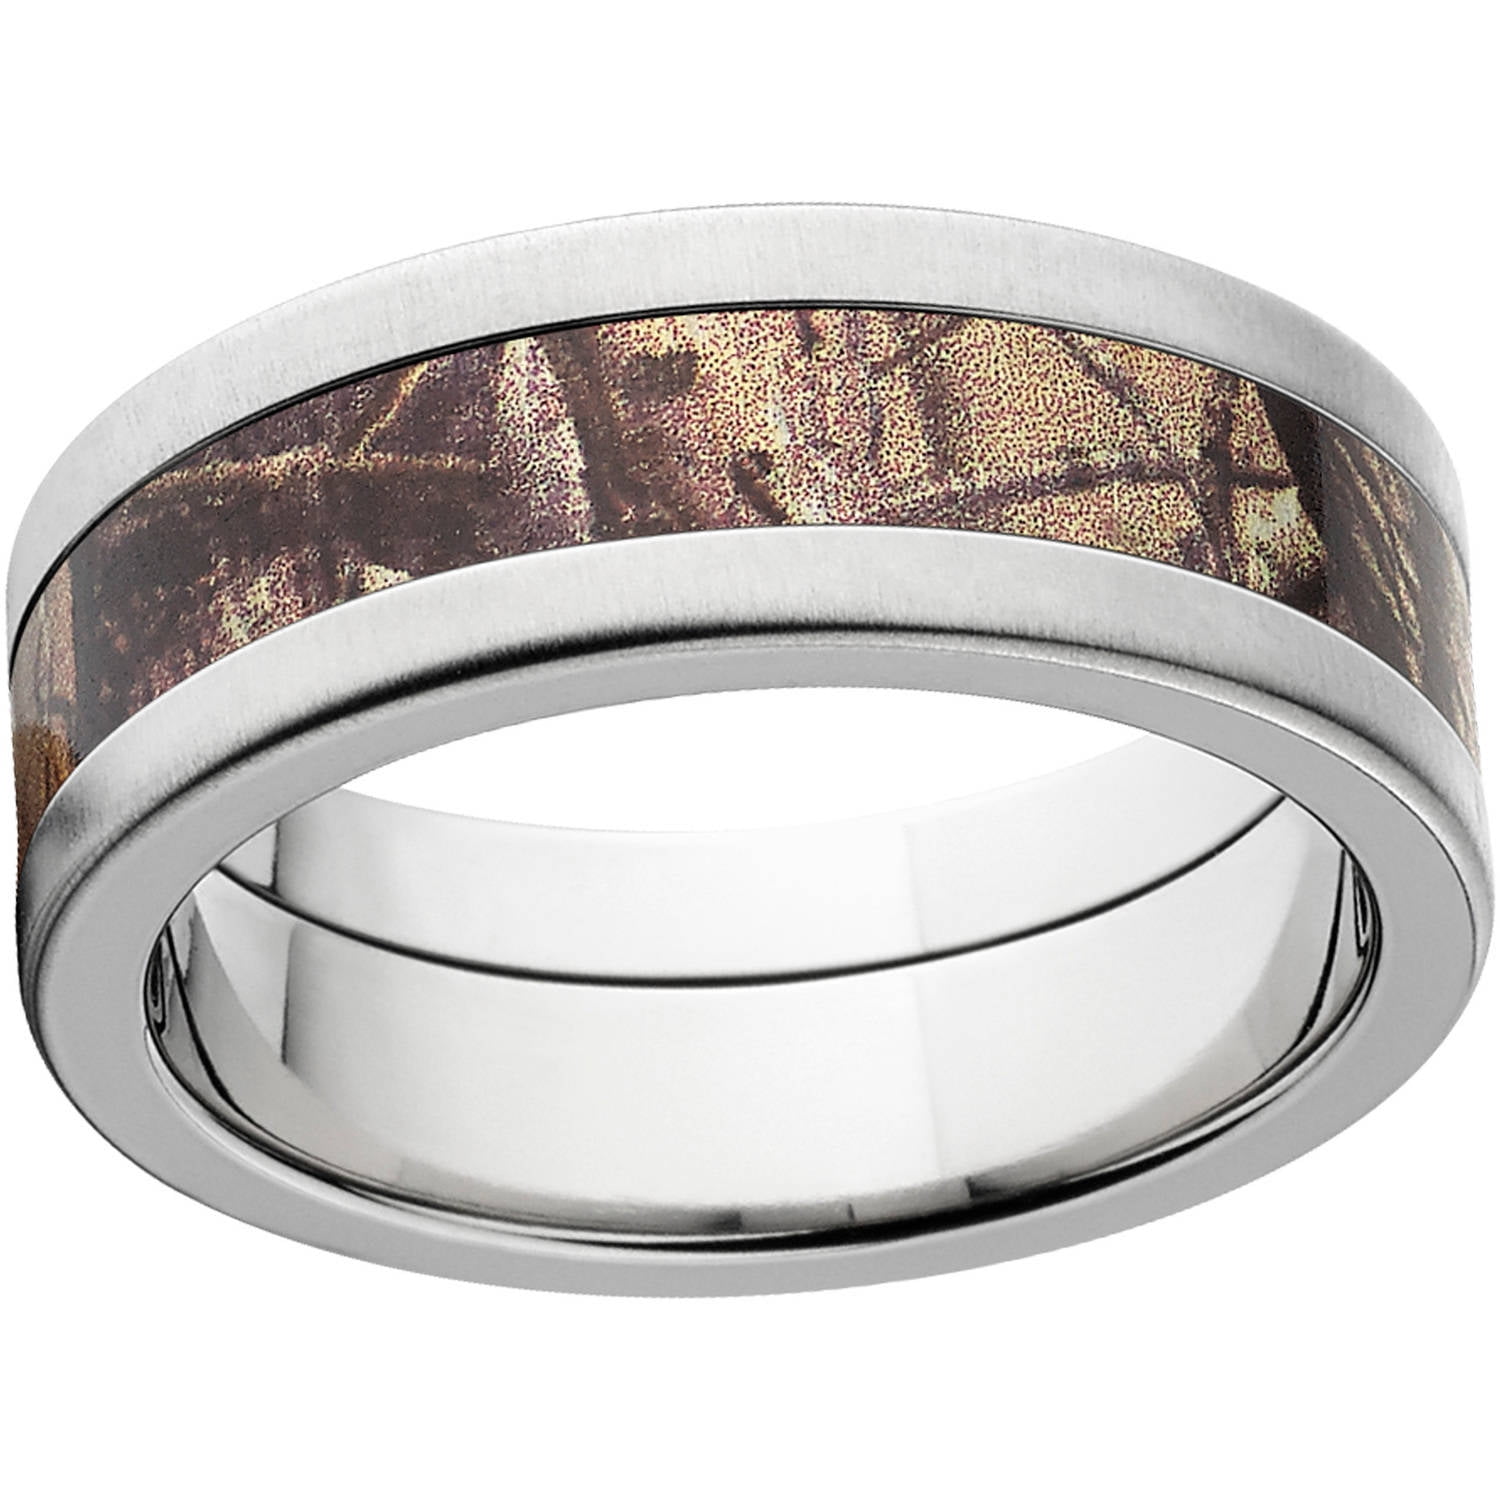 Realtree AP Men's Camo 8mm Stainless Steel Wedding Band